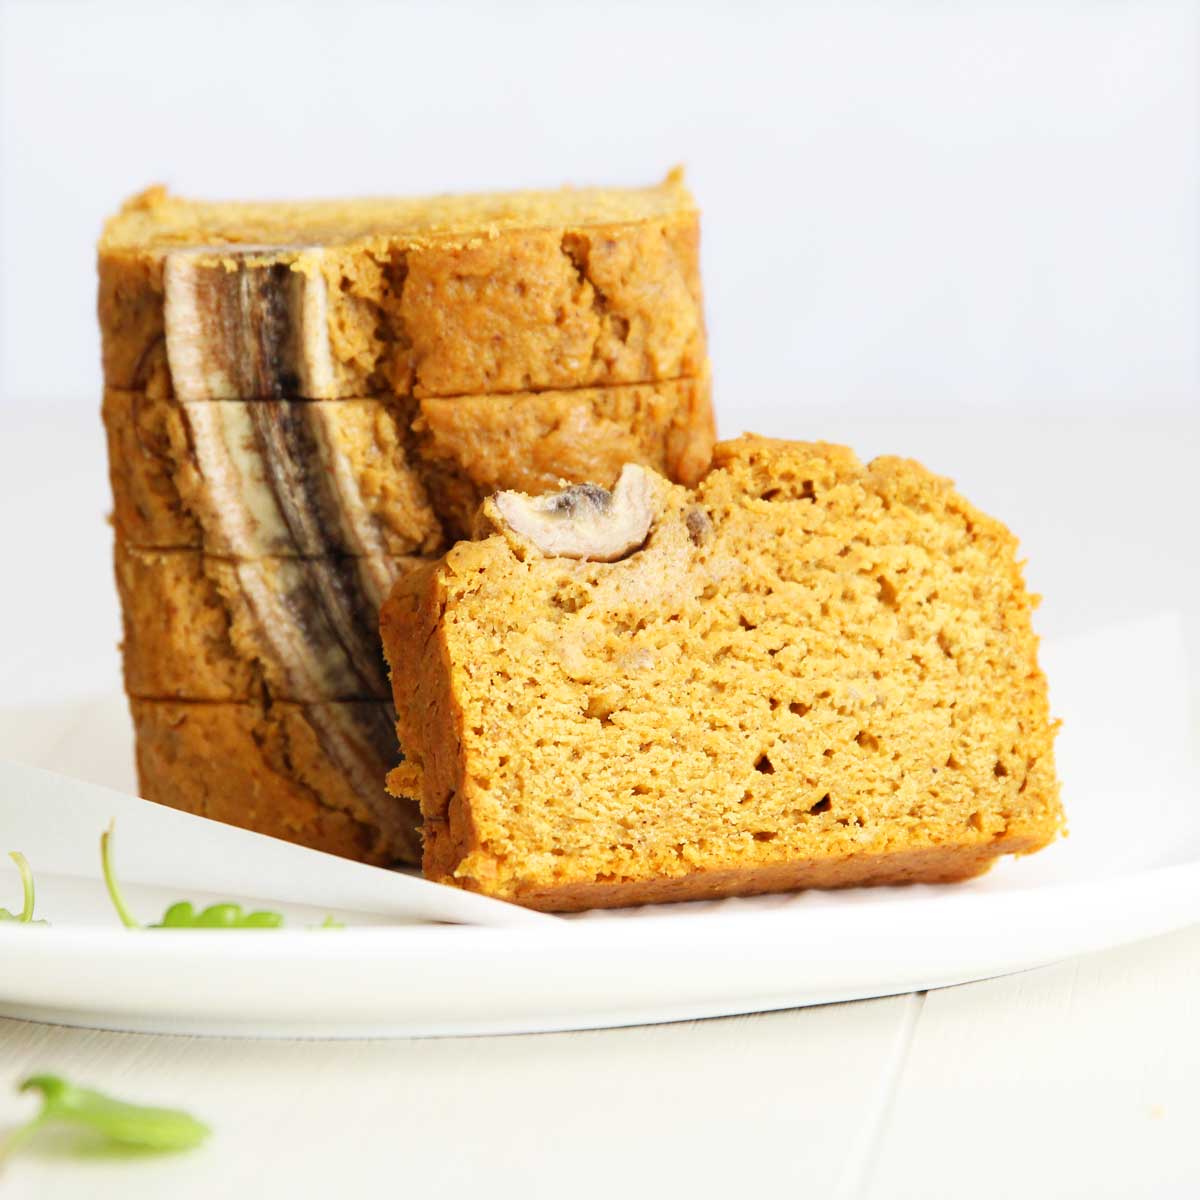 Super Moist Olive Oil Pumpkin Bread With Banana (Eggless & Dairy Free) - Red Bean Mochi Cake